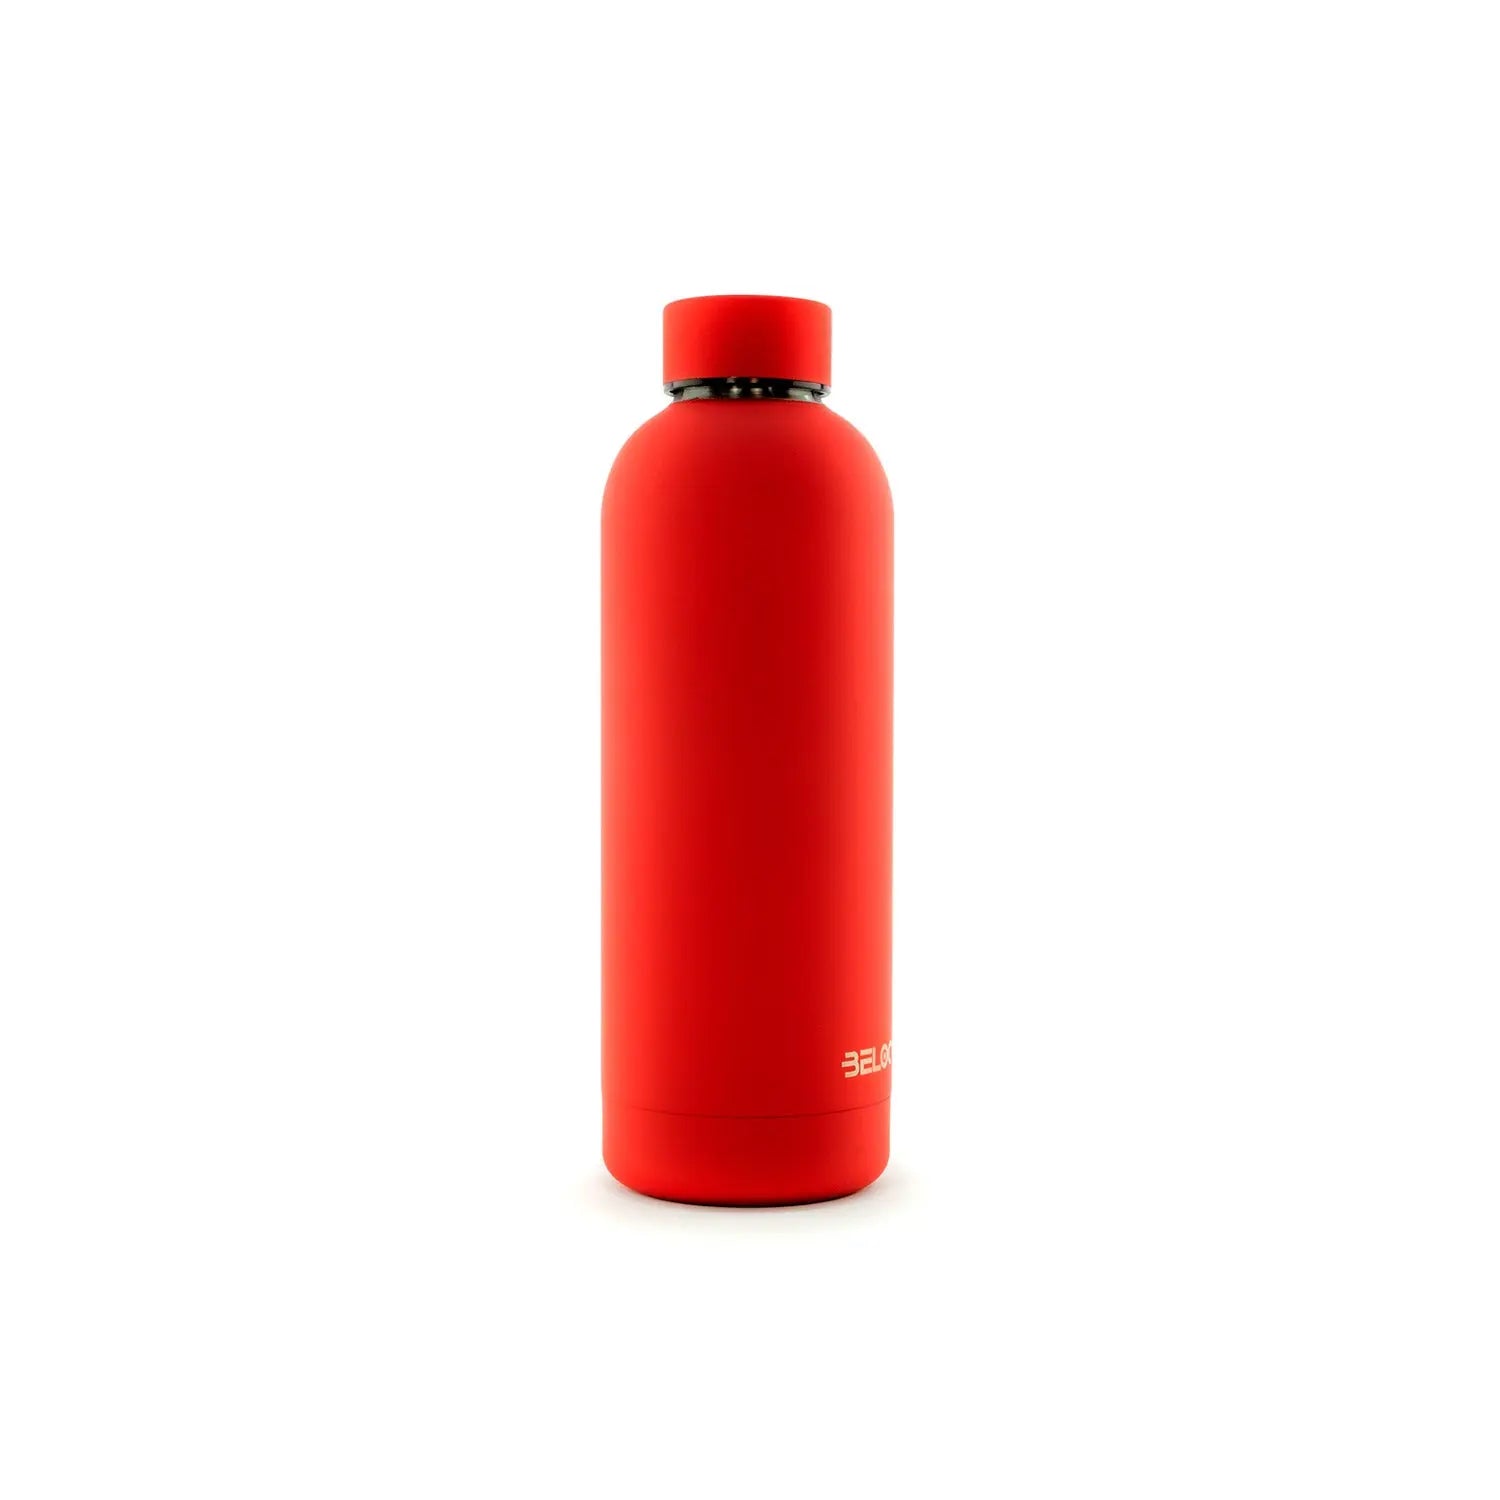 Classic Red Water Bottle | Red Water Bottle | BeLoco